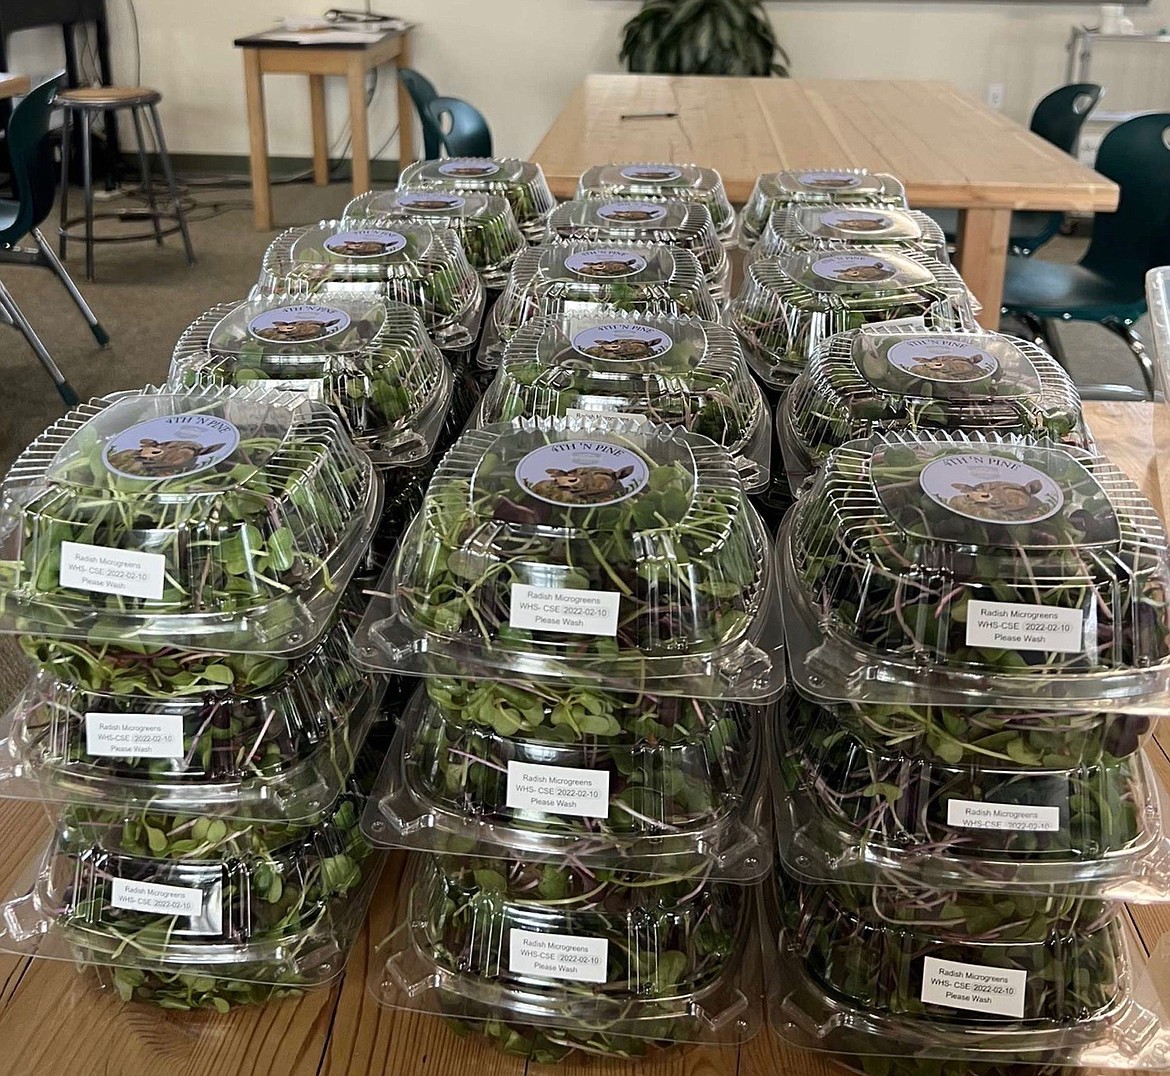 Packaged microgreens ready to sell by the Whitefish High School regenerative agriculture program. (Courtesy photo)